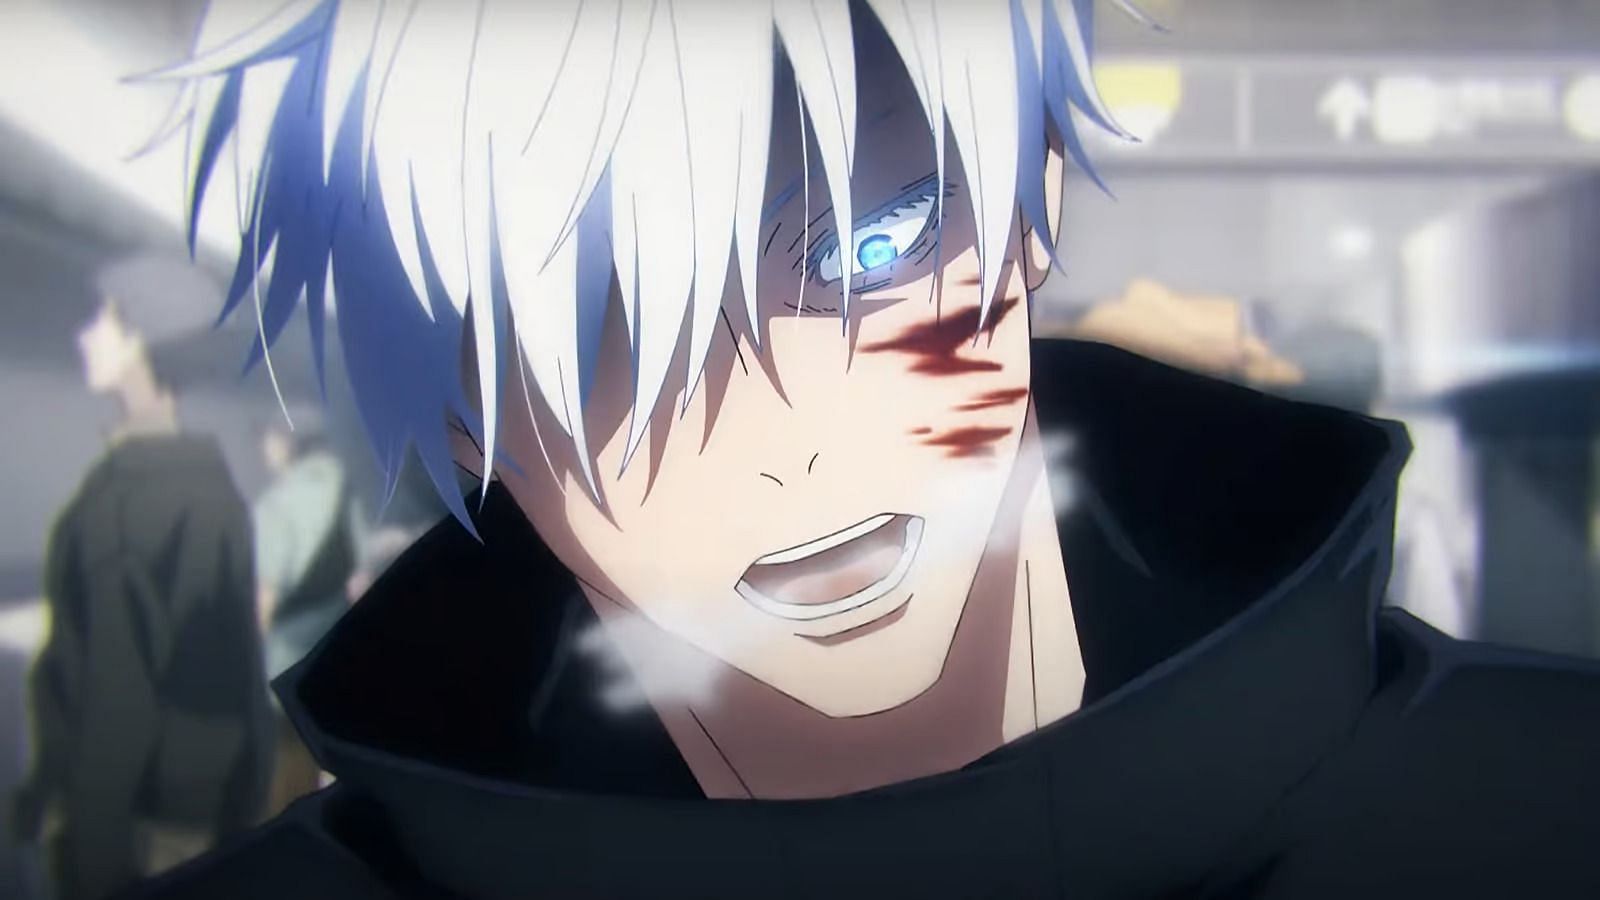 20+ Of The Most Traumatic Anime Shows That Go Deep